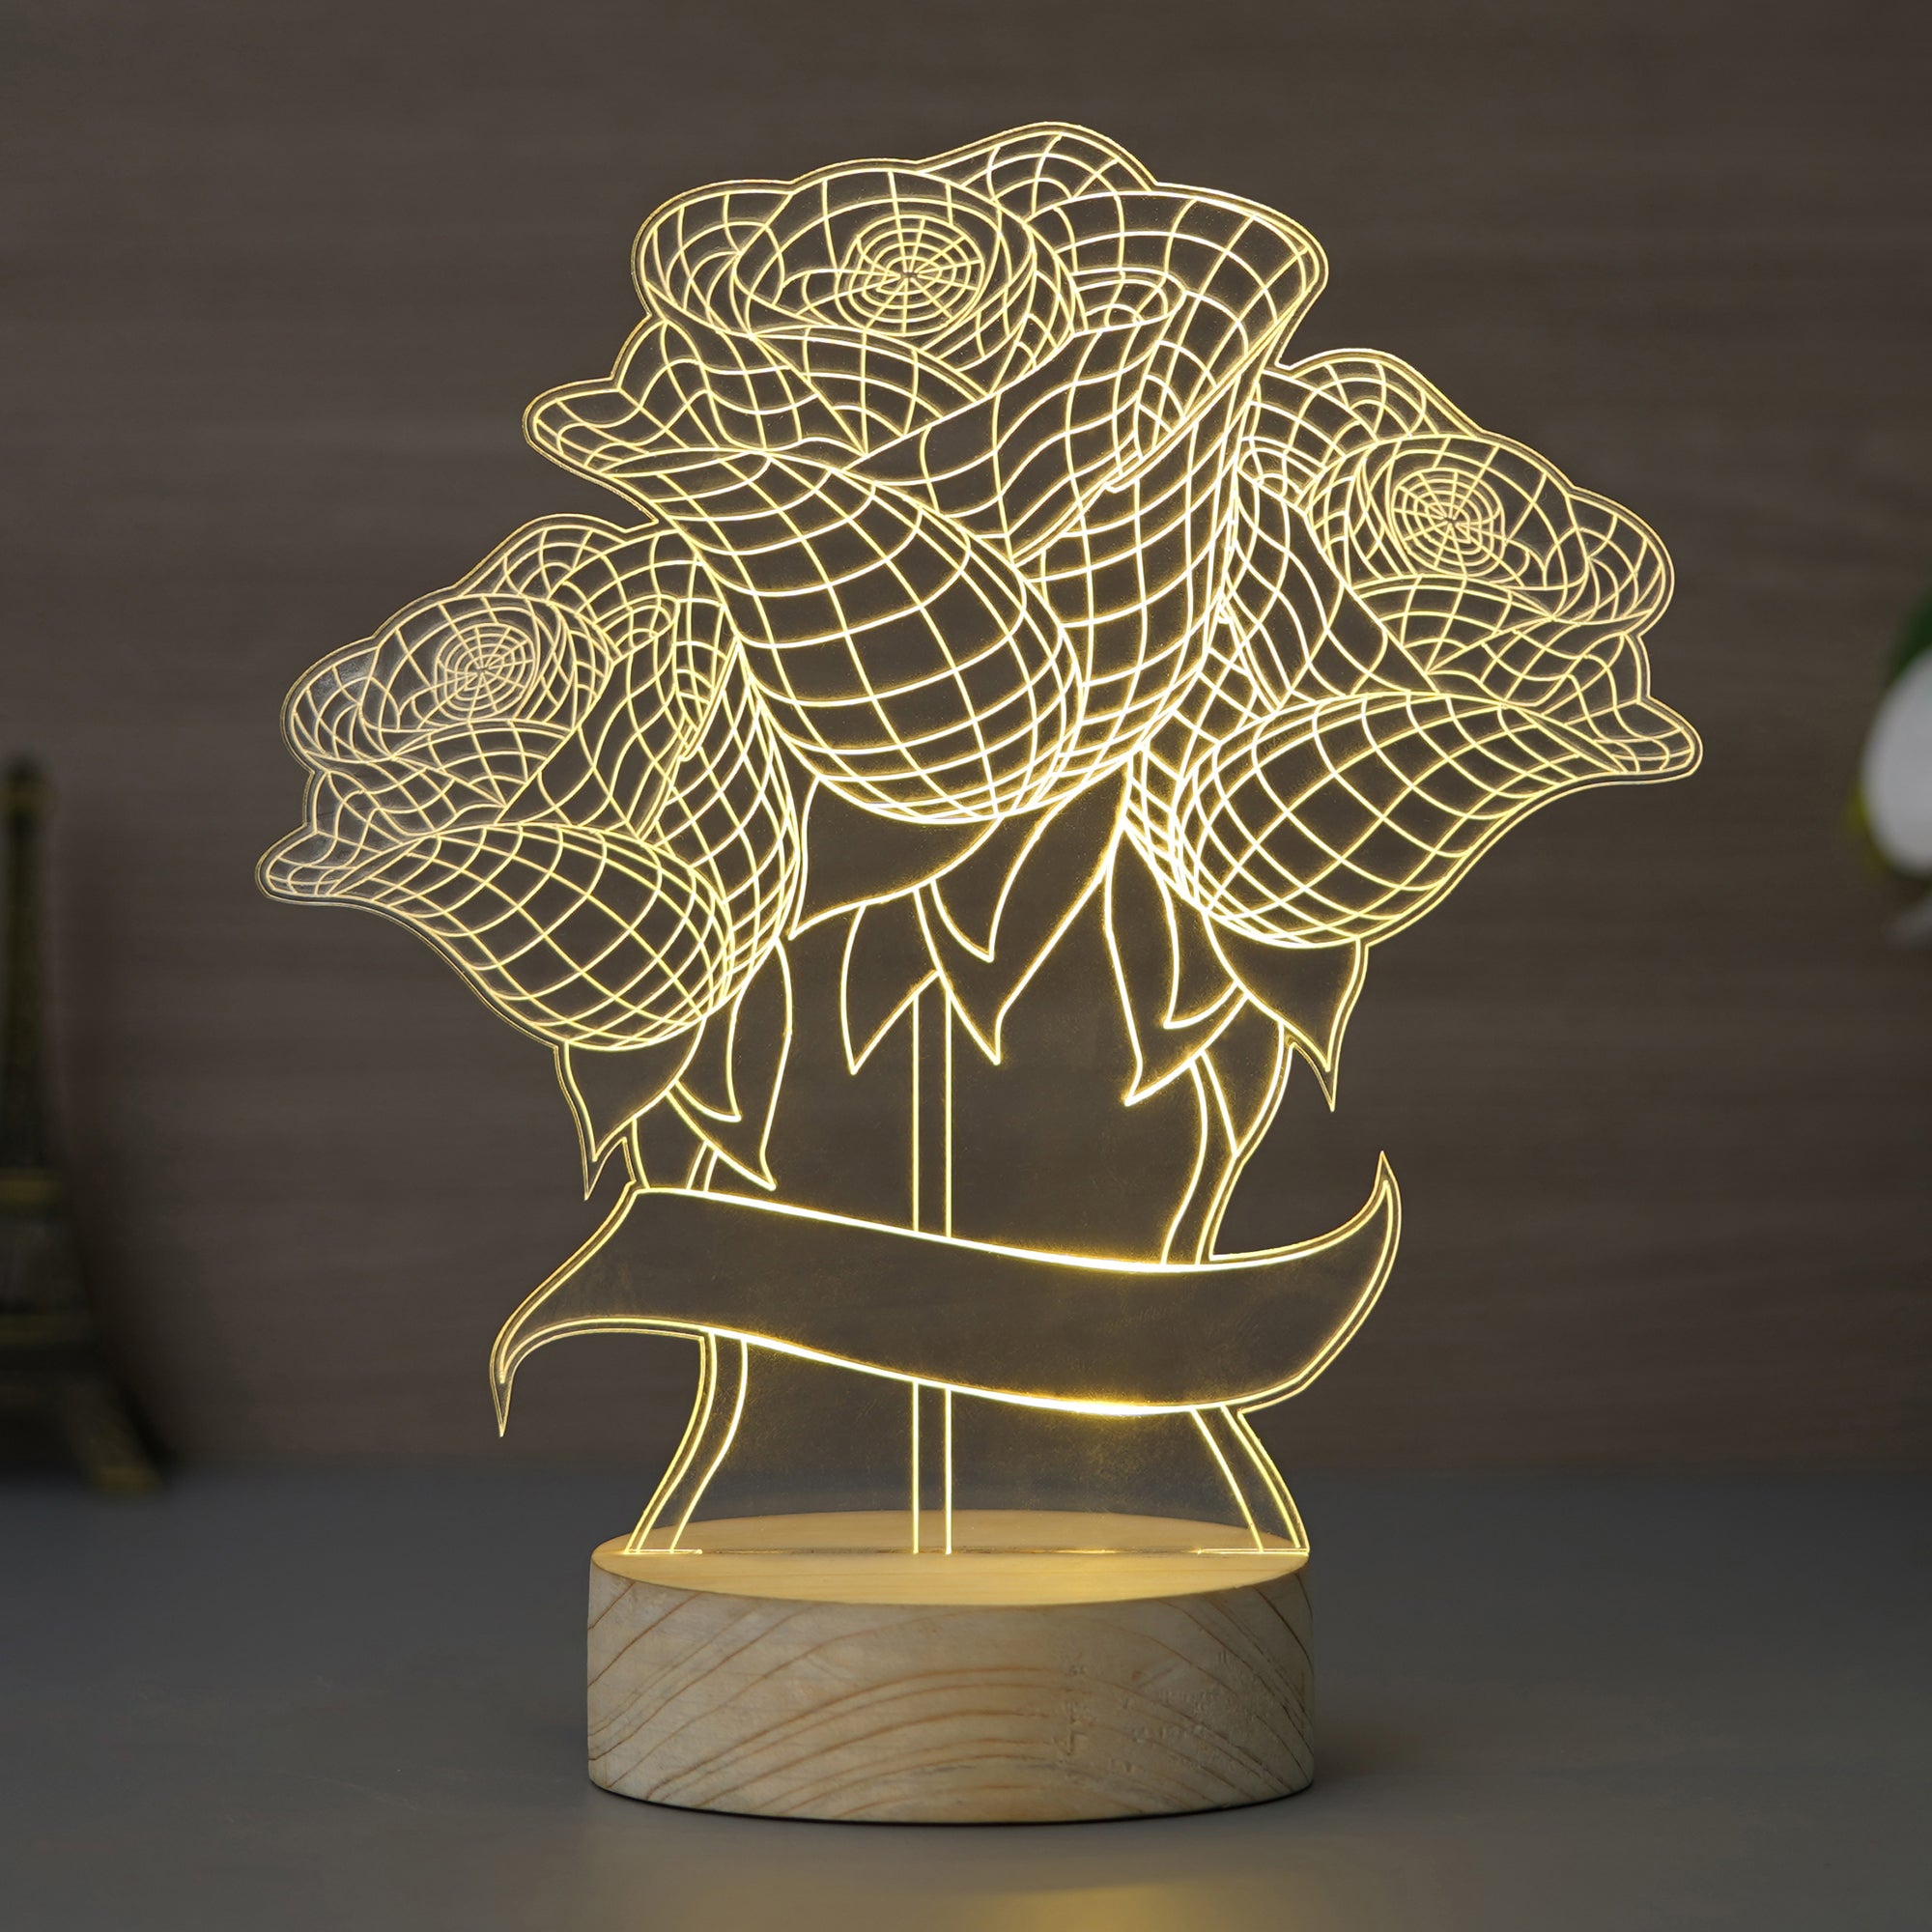 Rose Bouquet Design Carved on Acrylic & Wood Base Night Lamp